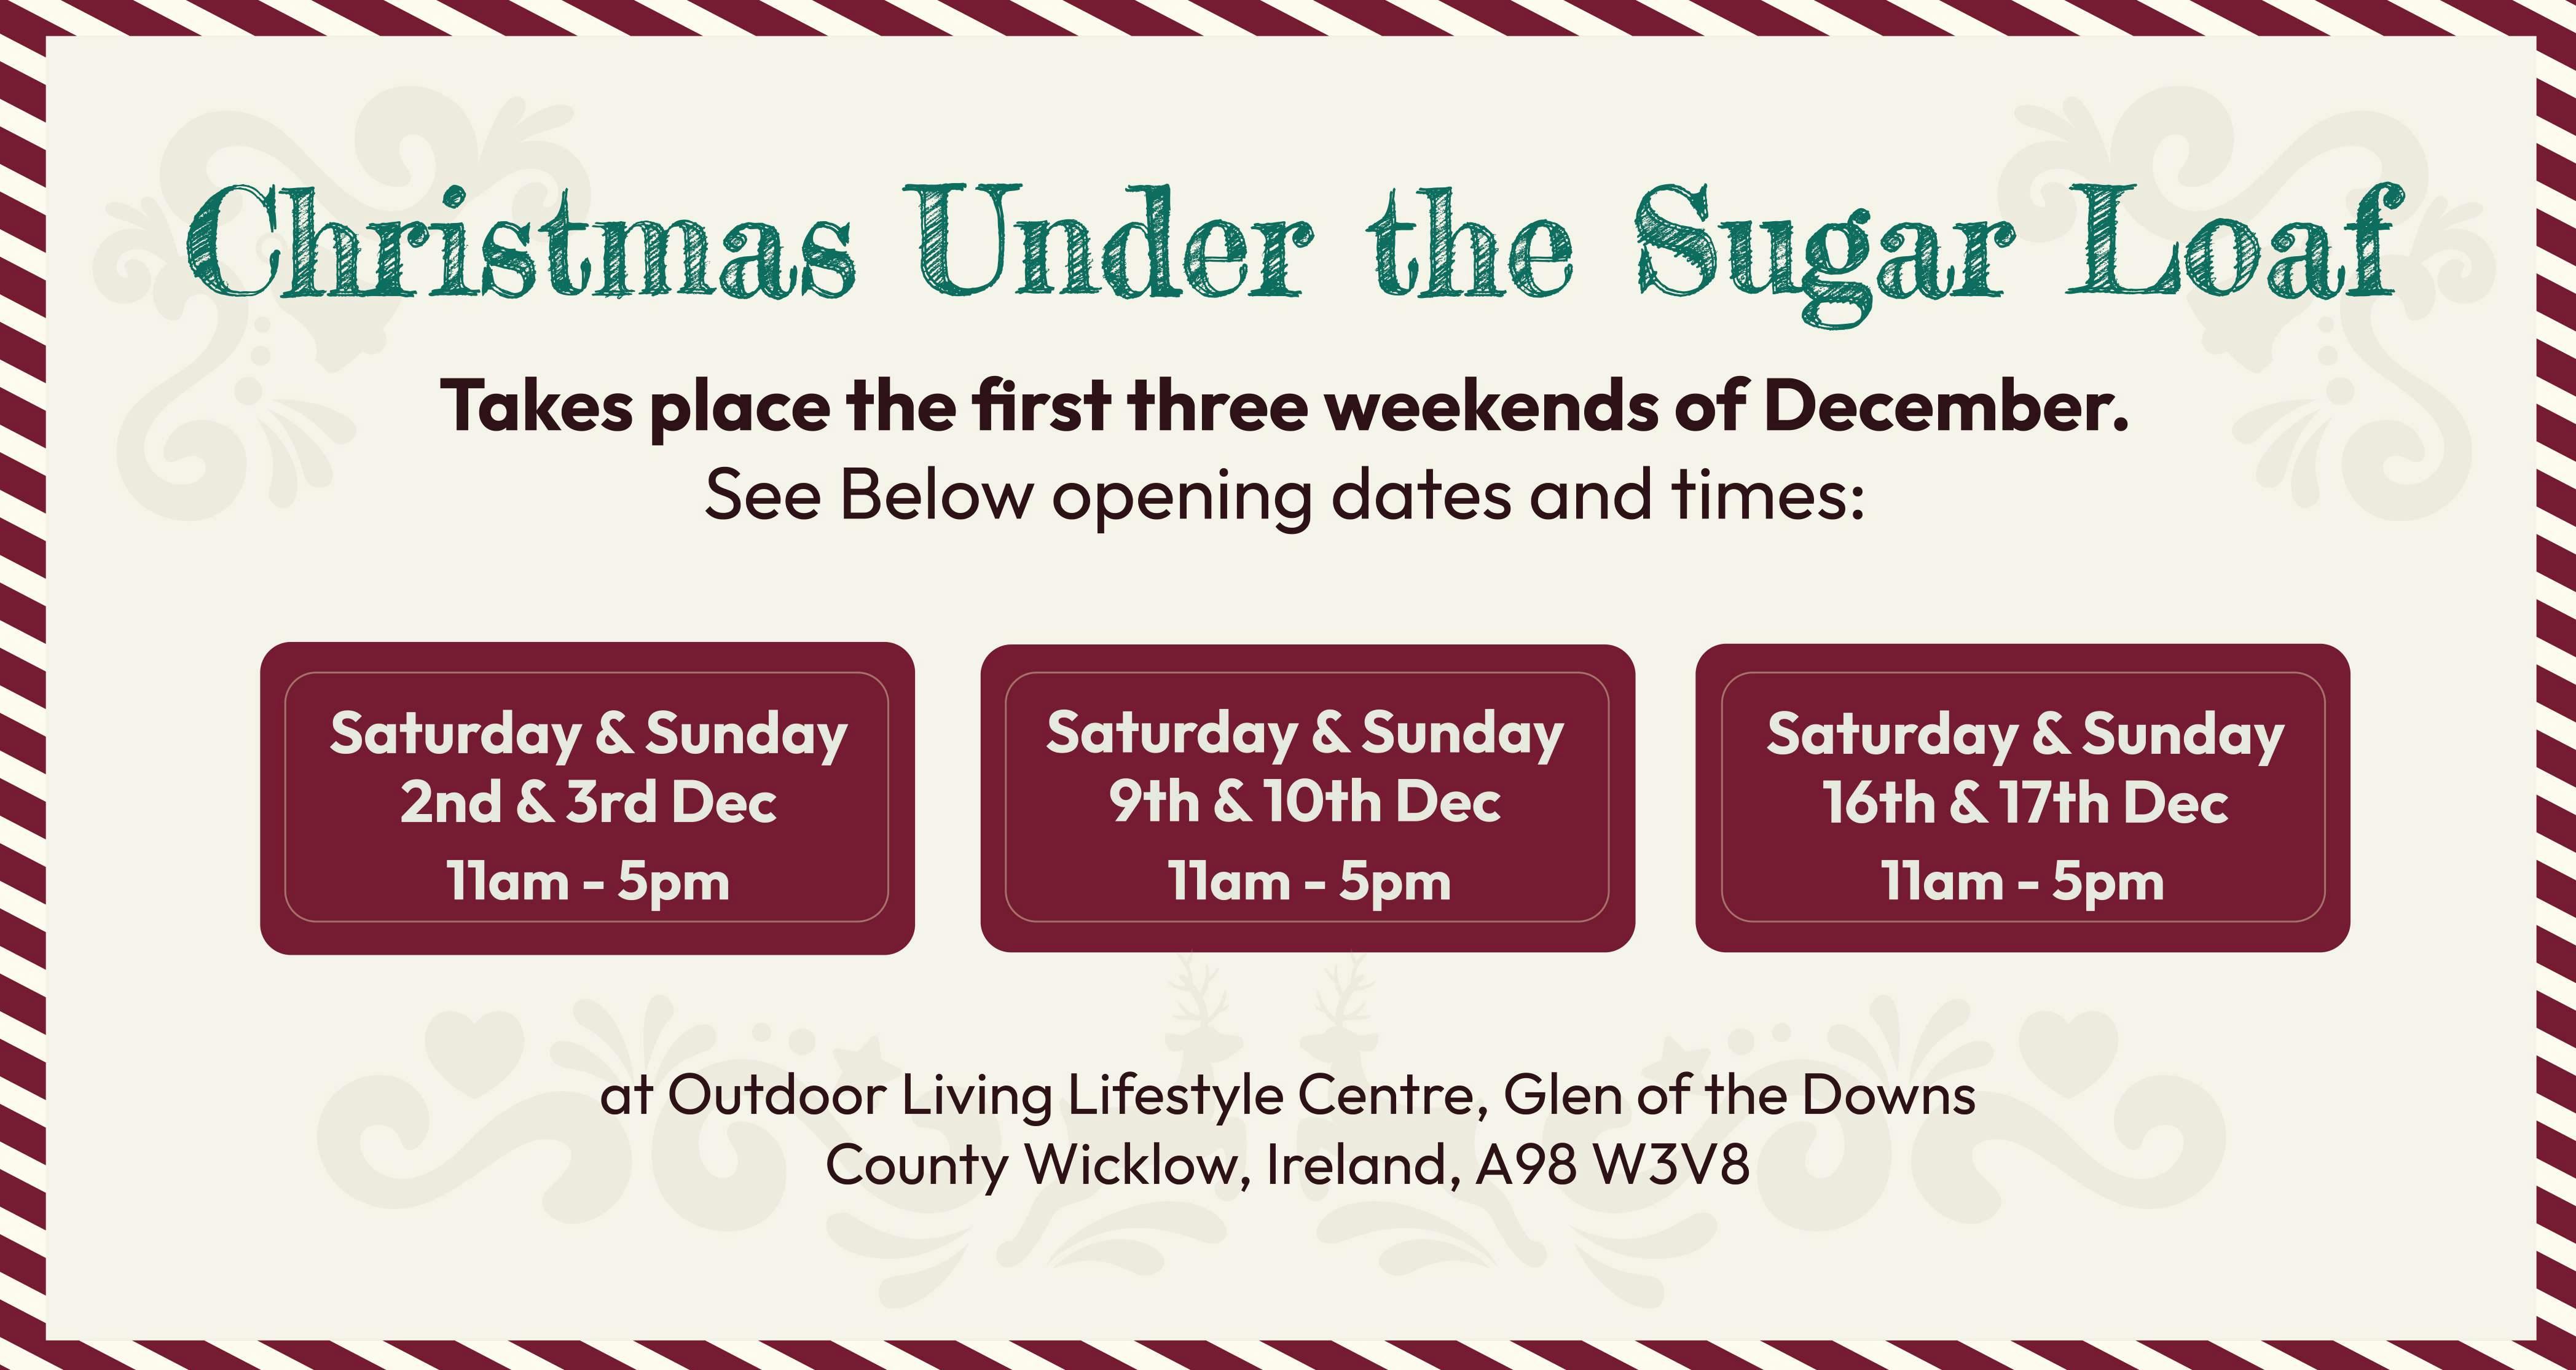 Christmas Under the Sugar Loaf Times